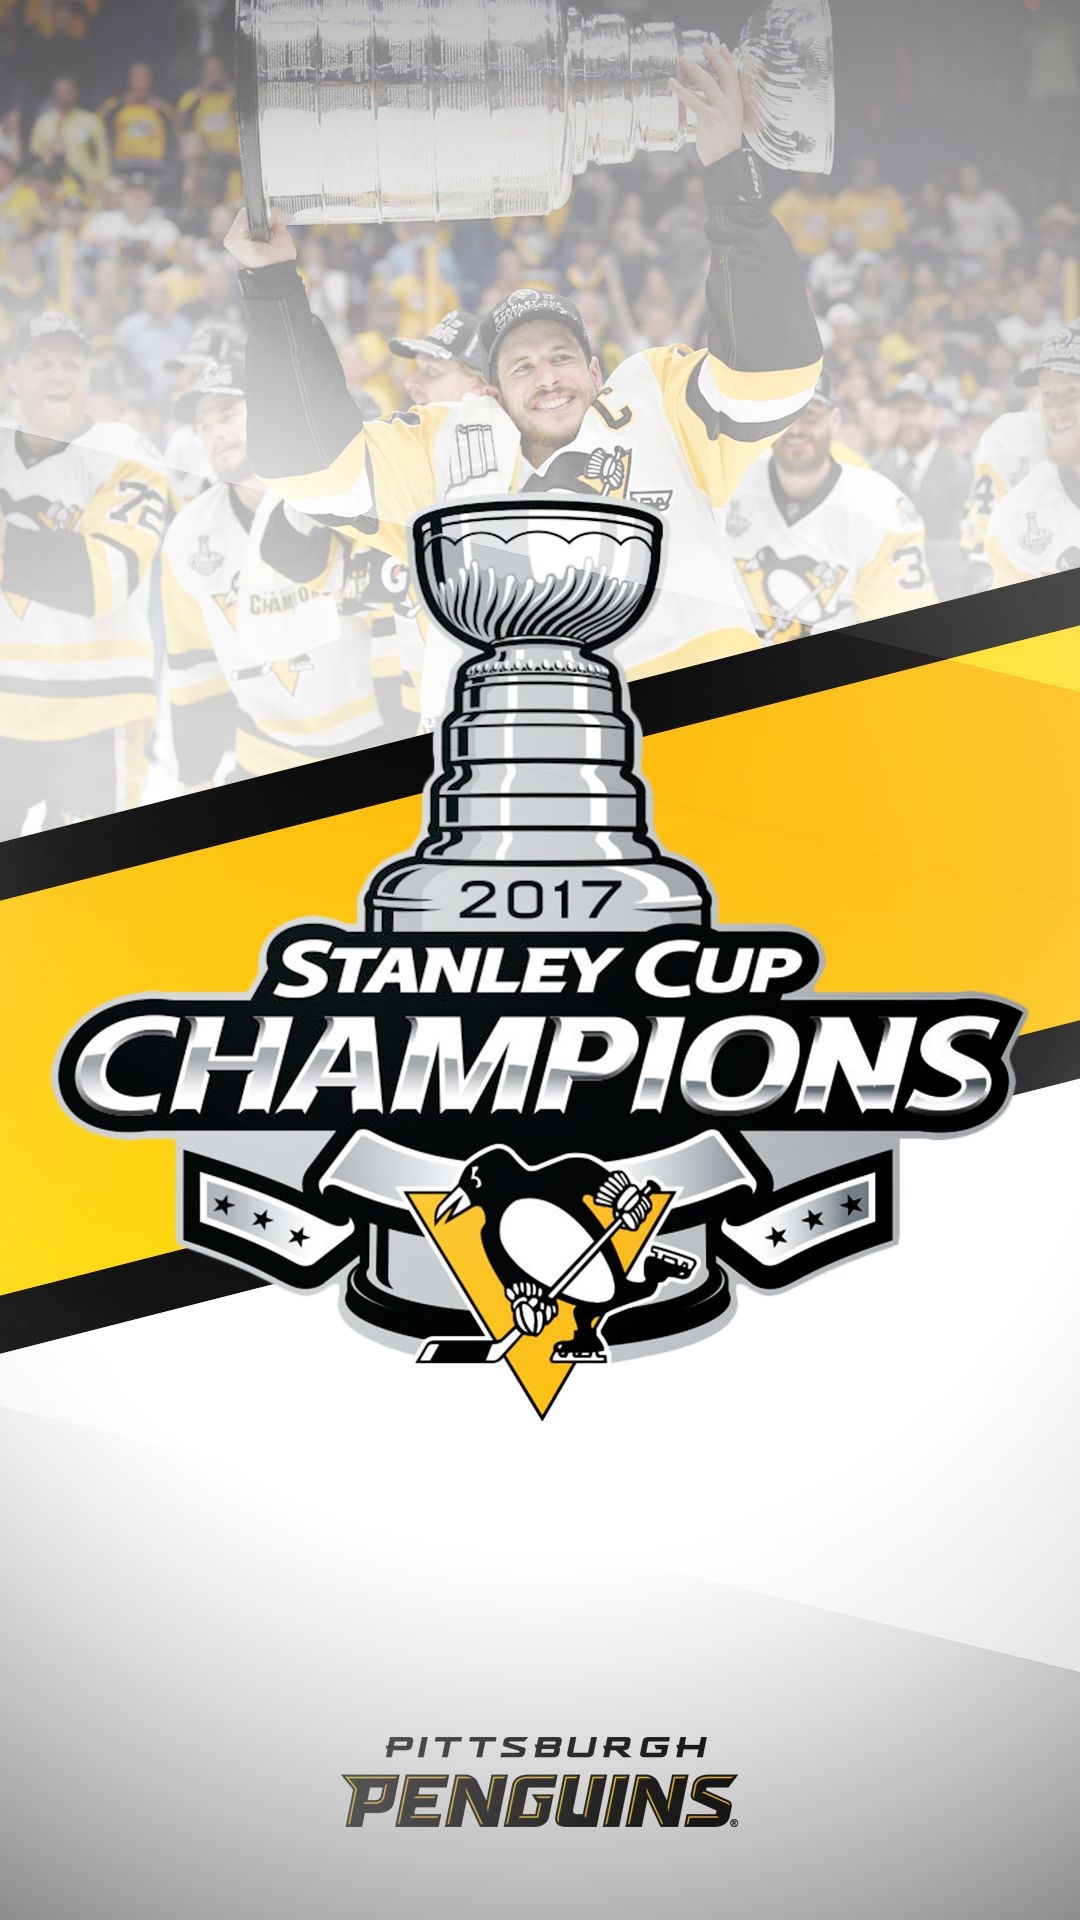 Pittsburgh Penguins: 2017 Stanley Cup champions, Won the Presidents' Trophy in 1992-93 season. 1080x1920 Full HD Wallpaper.